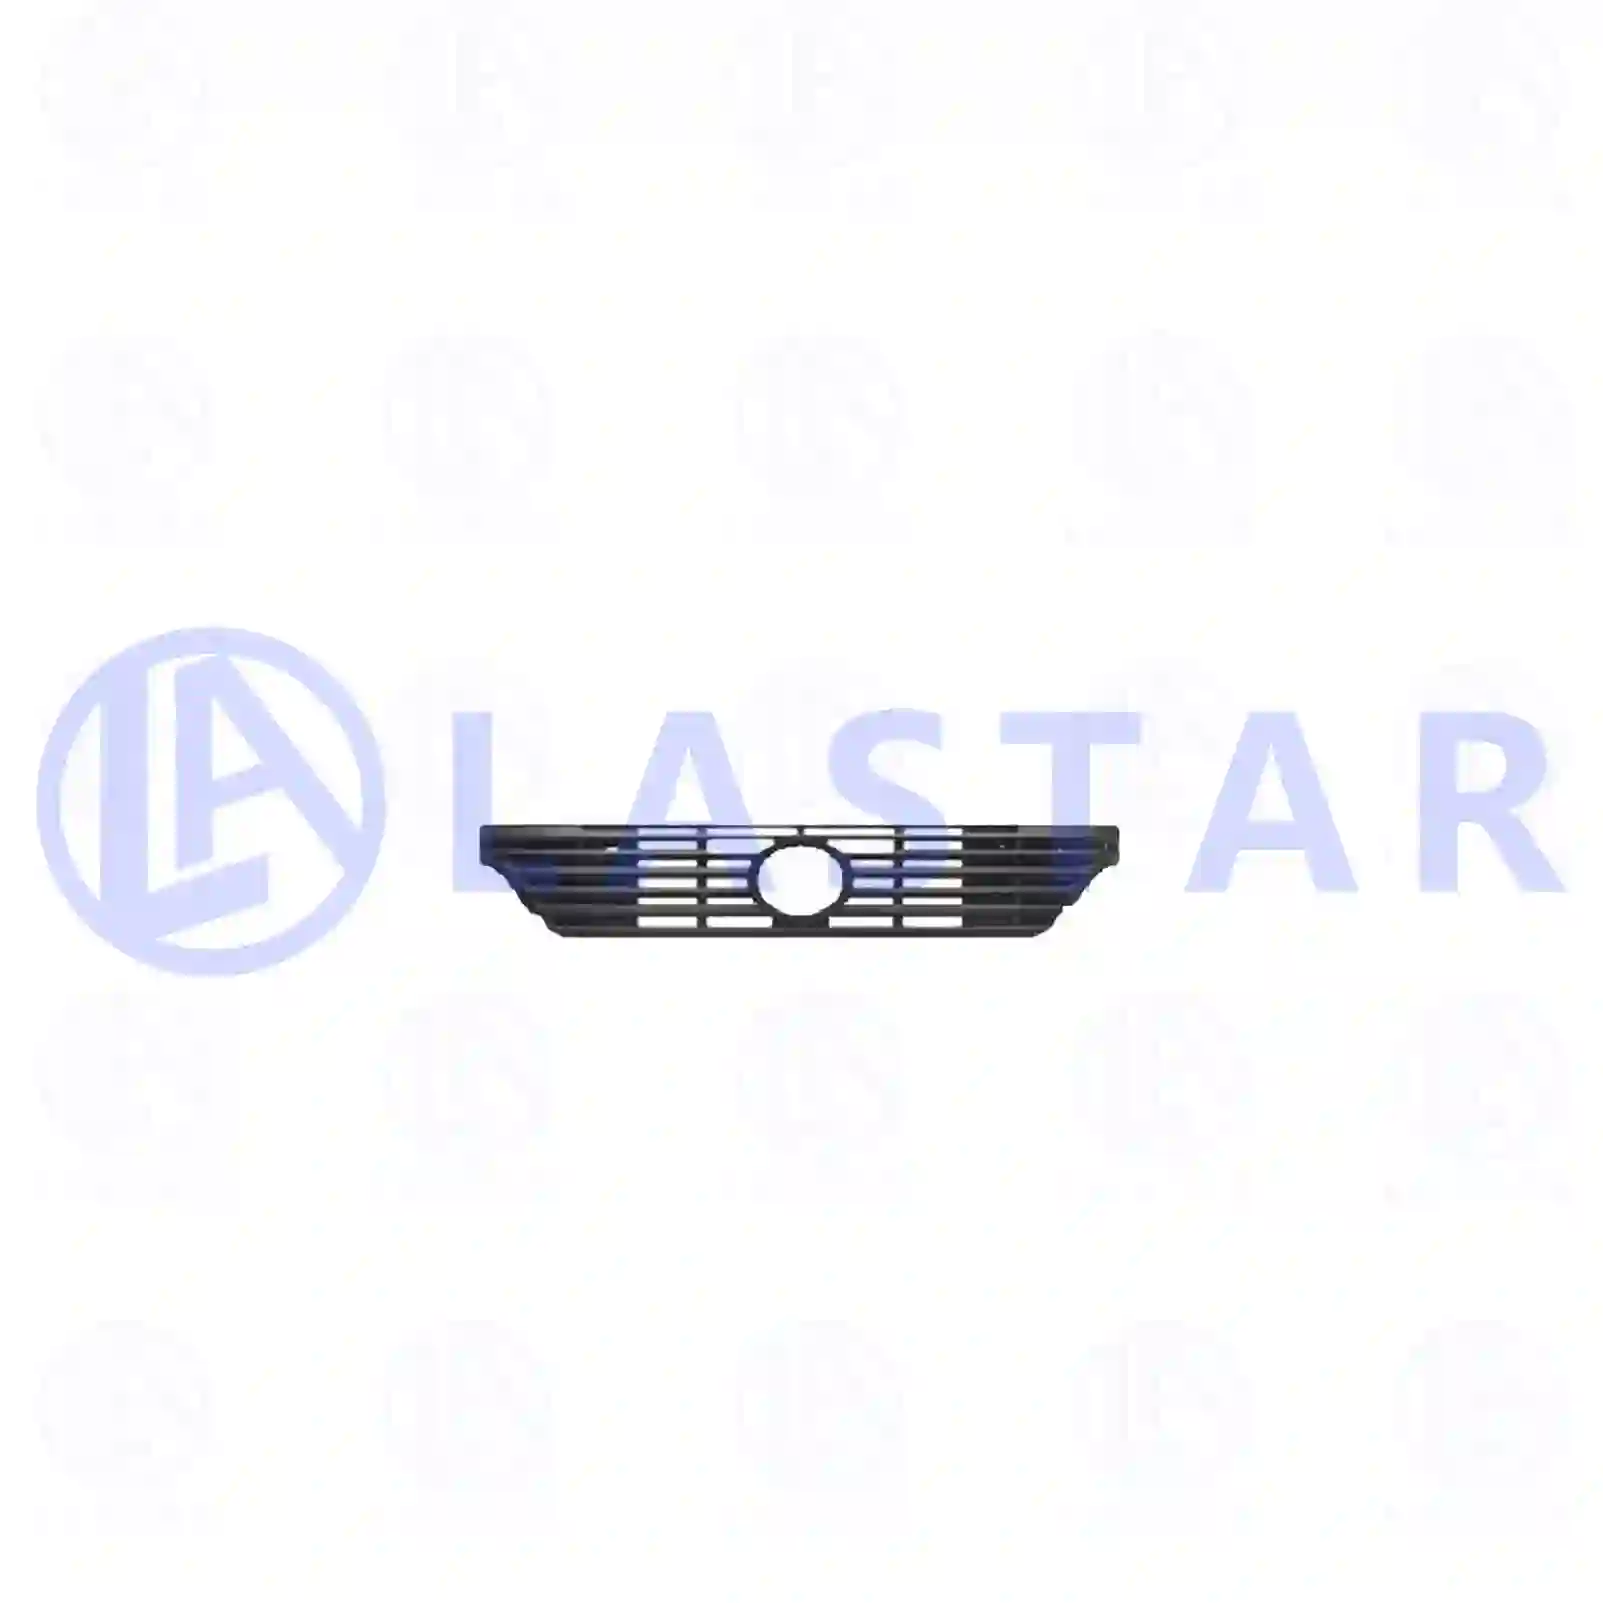 Front grill, 77718791, 9417511018, 94175 ||  77718791 Lastar Spare Part | Truck Spare Parts, Auotomotive Spare Parts Front grill, 77718791, 9417511018, 94175 ||  77718791 Lastar Spare Part | Truck Spare Parts, Auotomotive Spare Parts